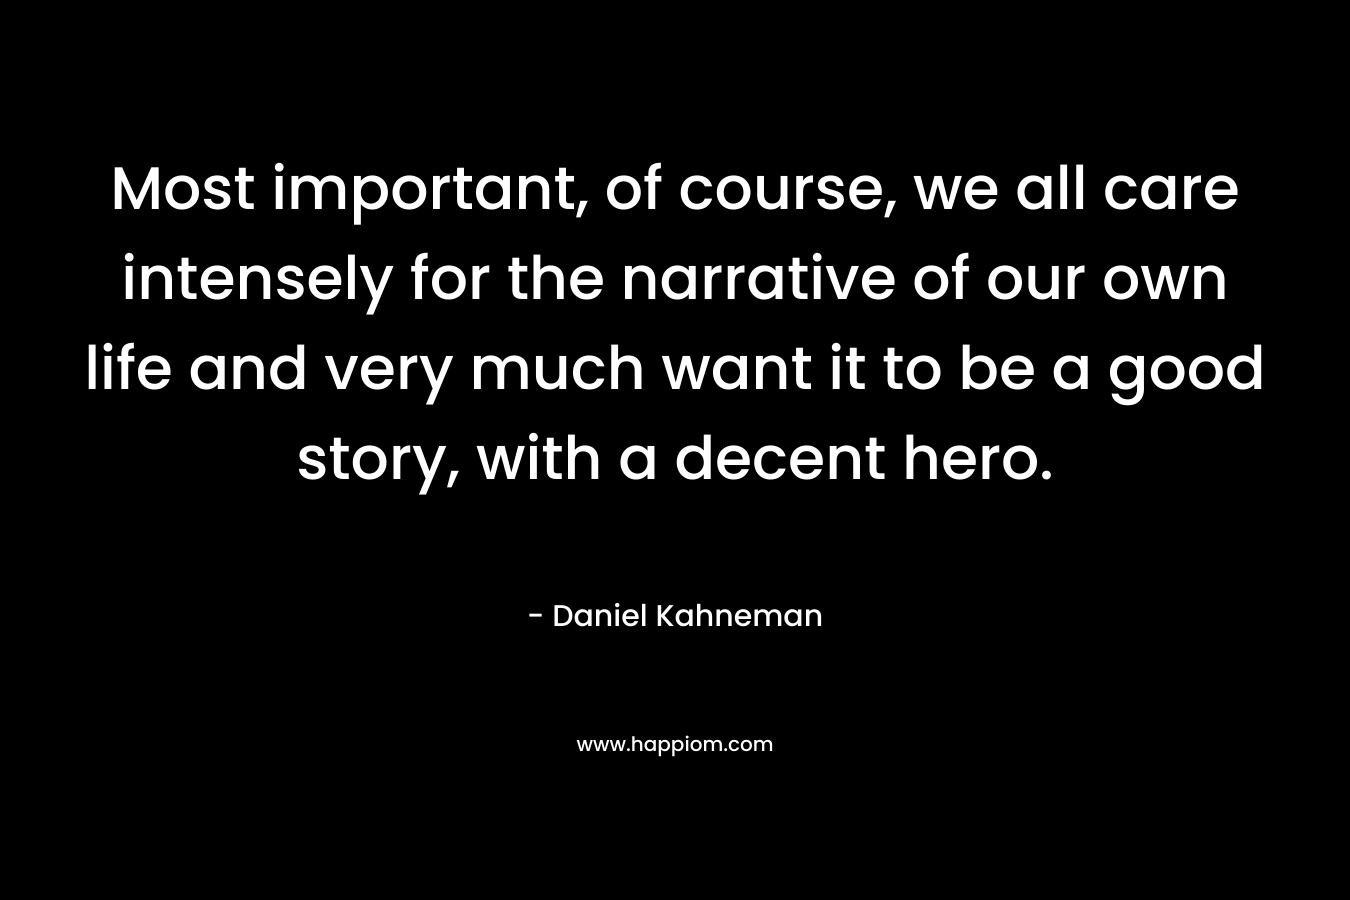 Most important, of course, we all care intensely for the narrative of our own life and very much want it to be a good story, with a decent hero. – Daniel Kahneman